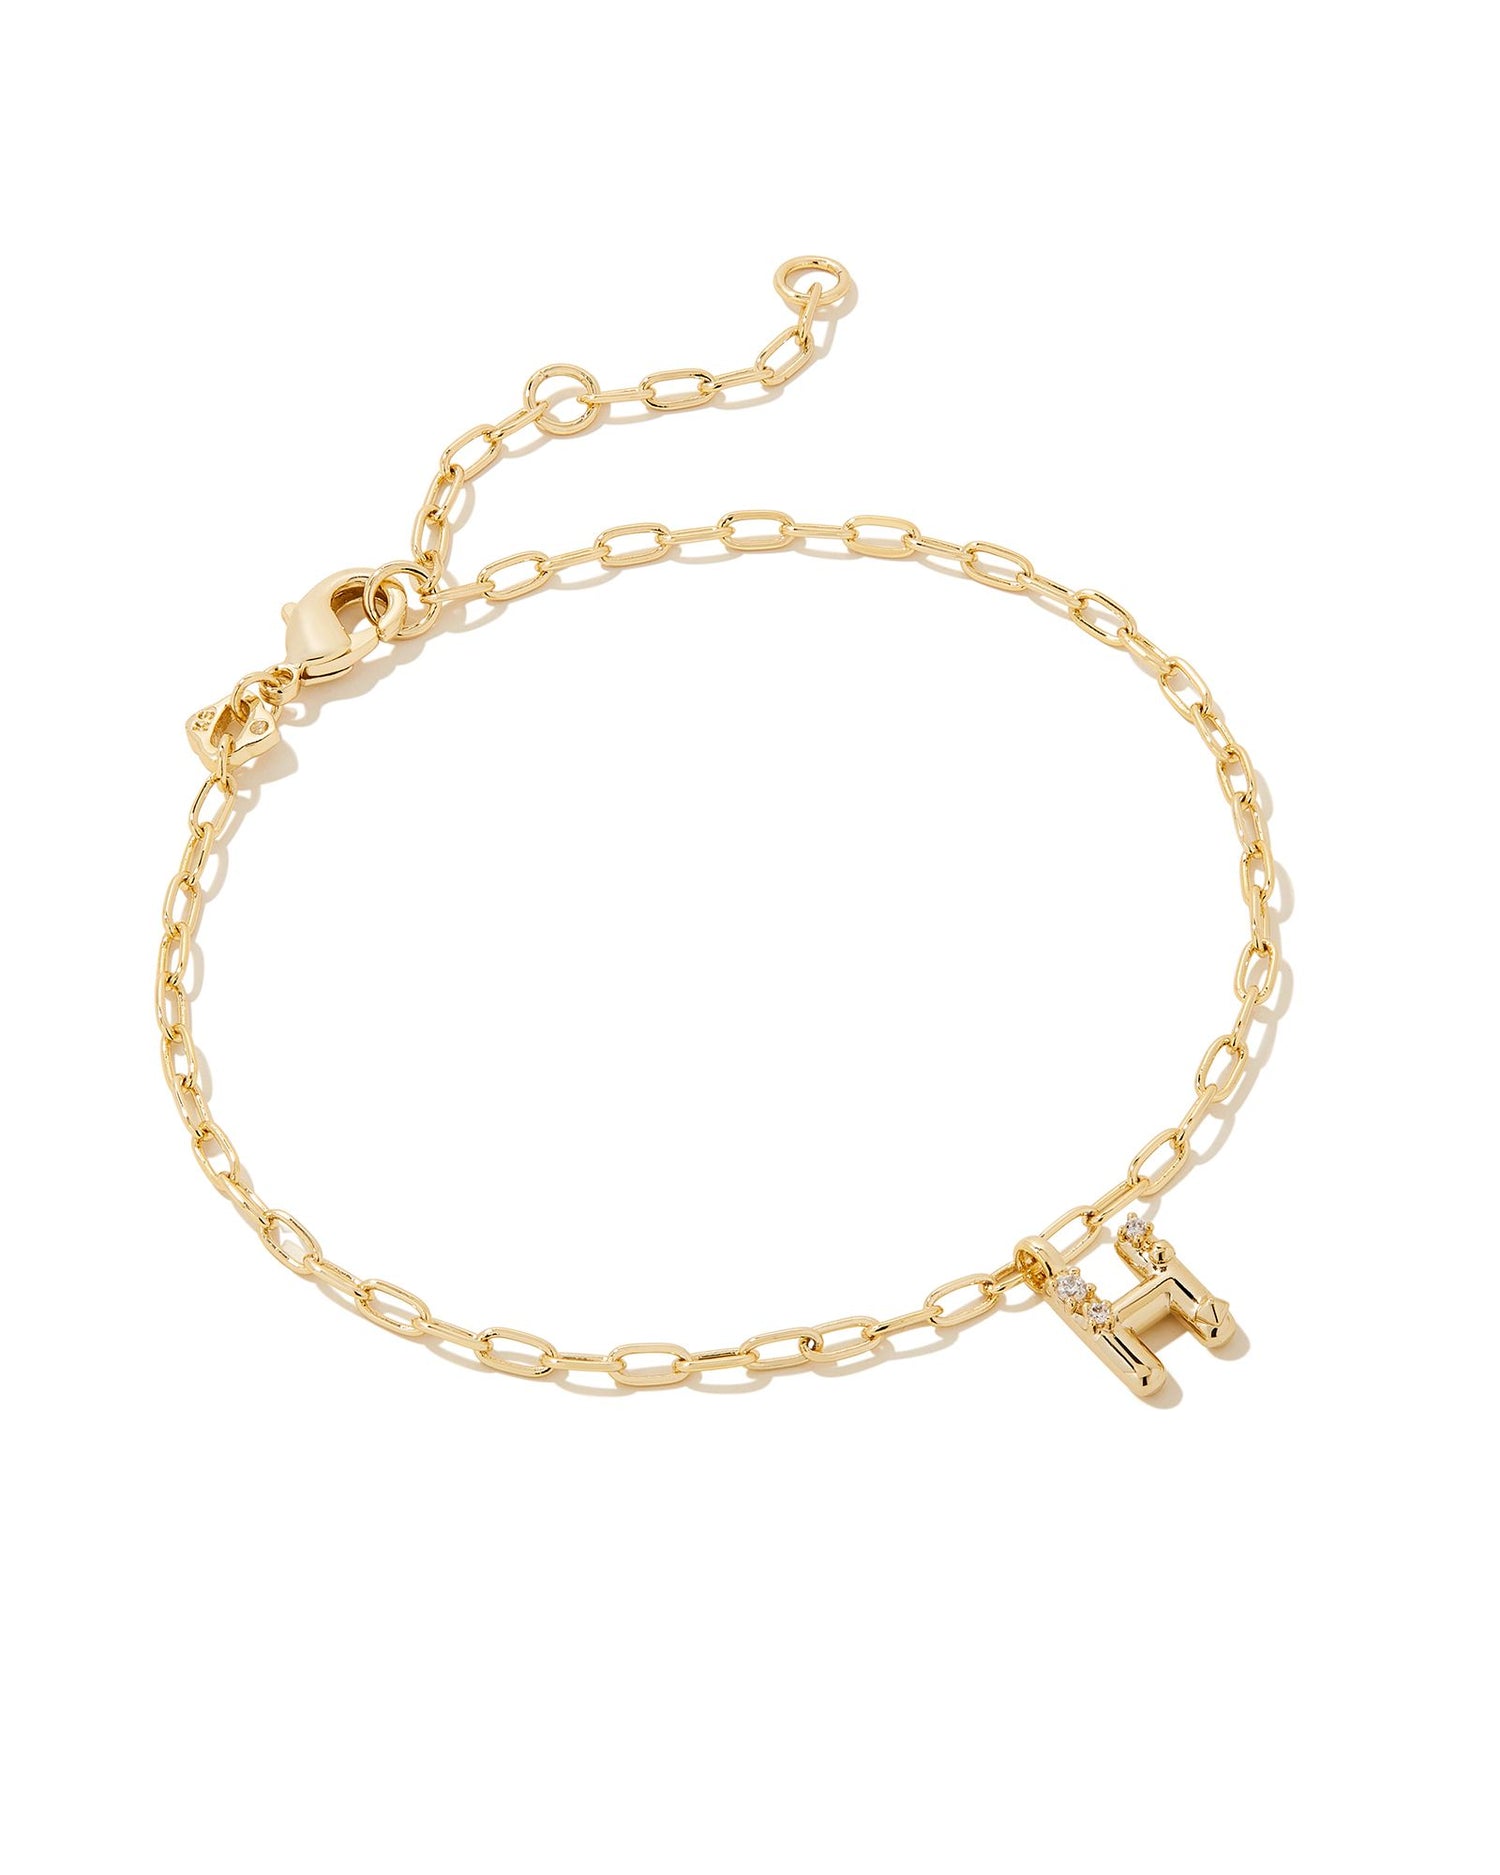 Add a personal touch to your wrist stack with the Crystal Delicate Chain Bracelet in White Crystal, our first Fashion Jewelry initial bracelet. Featuring a dainty chain and letter charm with a hint of sparkle, this bracelet is the perfect way to celebrate the ones you love—including yourself!  Dimensions- 6.5' CHAIN WITH 1.5' EXTENDER, 0.45'L X 0.26"W PENDANT Metal- 14K Gold plated over brass Closure- Lobster Clasp Material-  White CZ Letter H